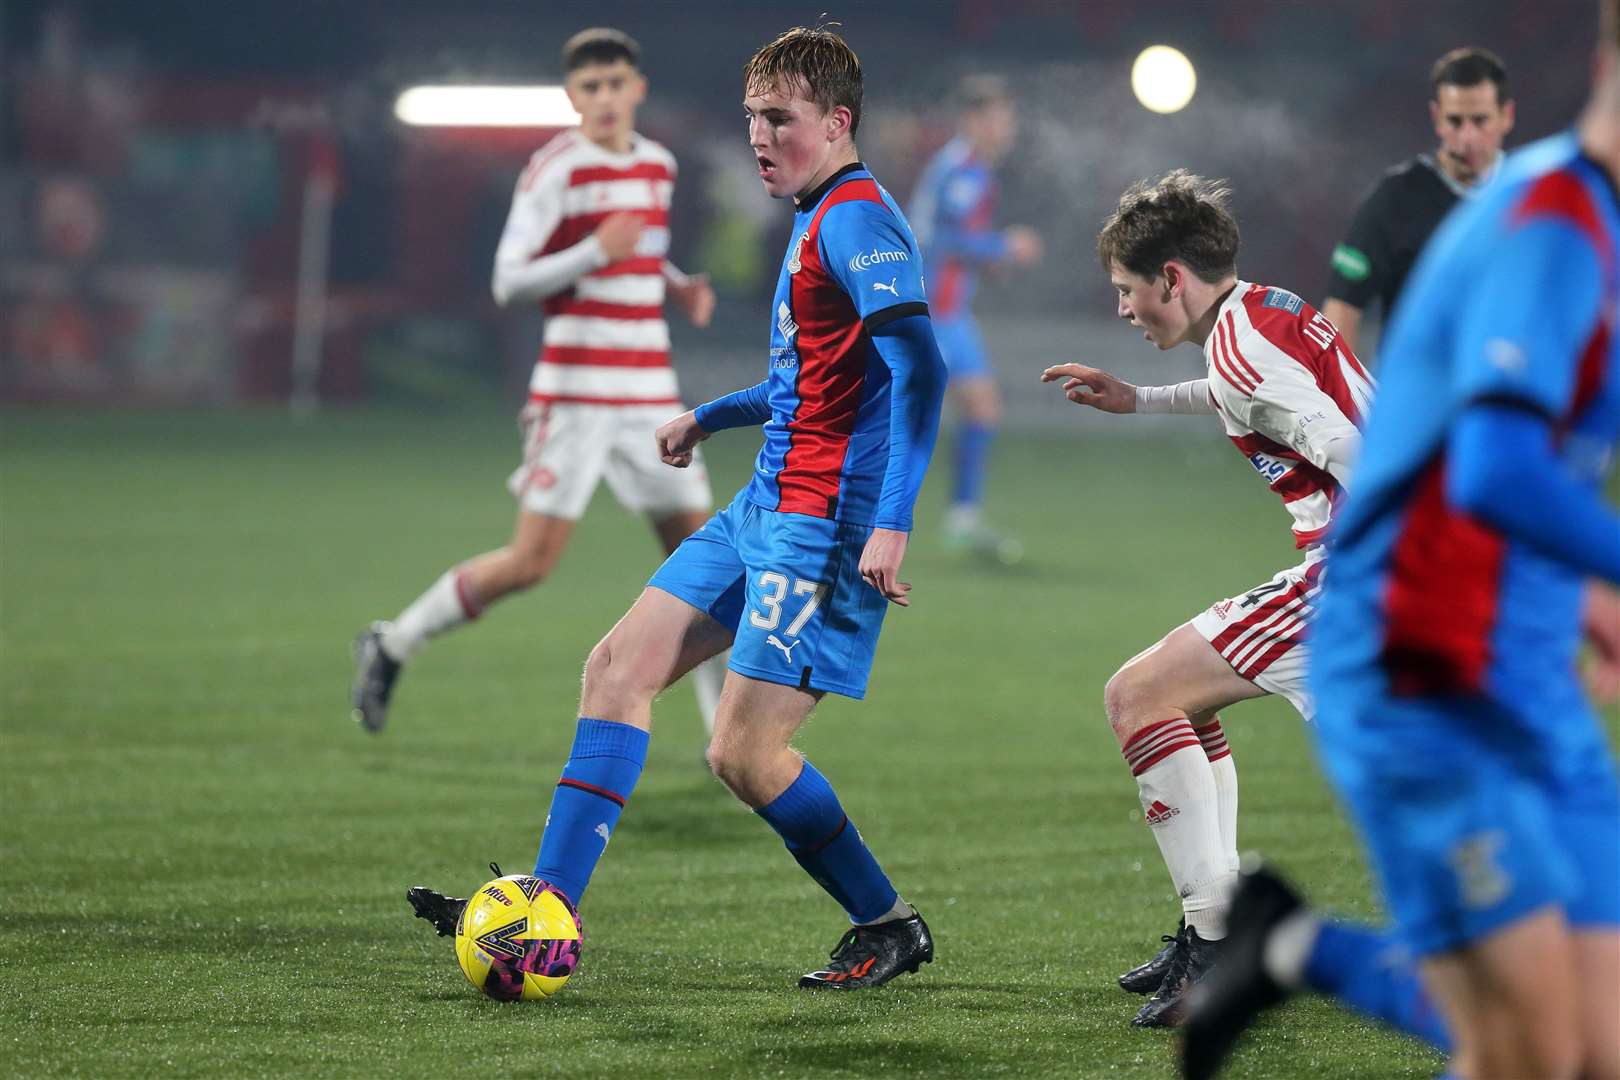 Aaron Nicolson is one of two Caley Thistle players picked for a Scottish Schools' select ahead of matches next year. Picture: Ken Macpherson